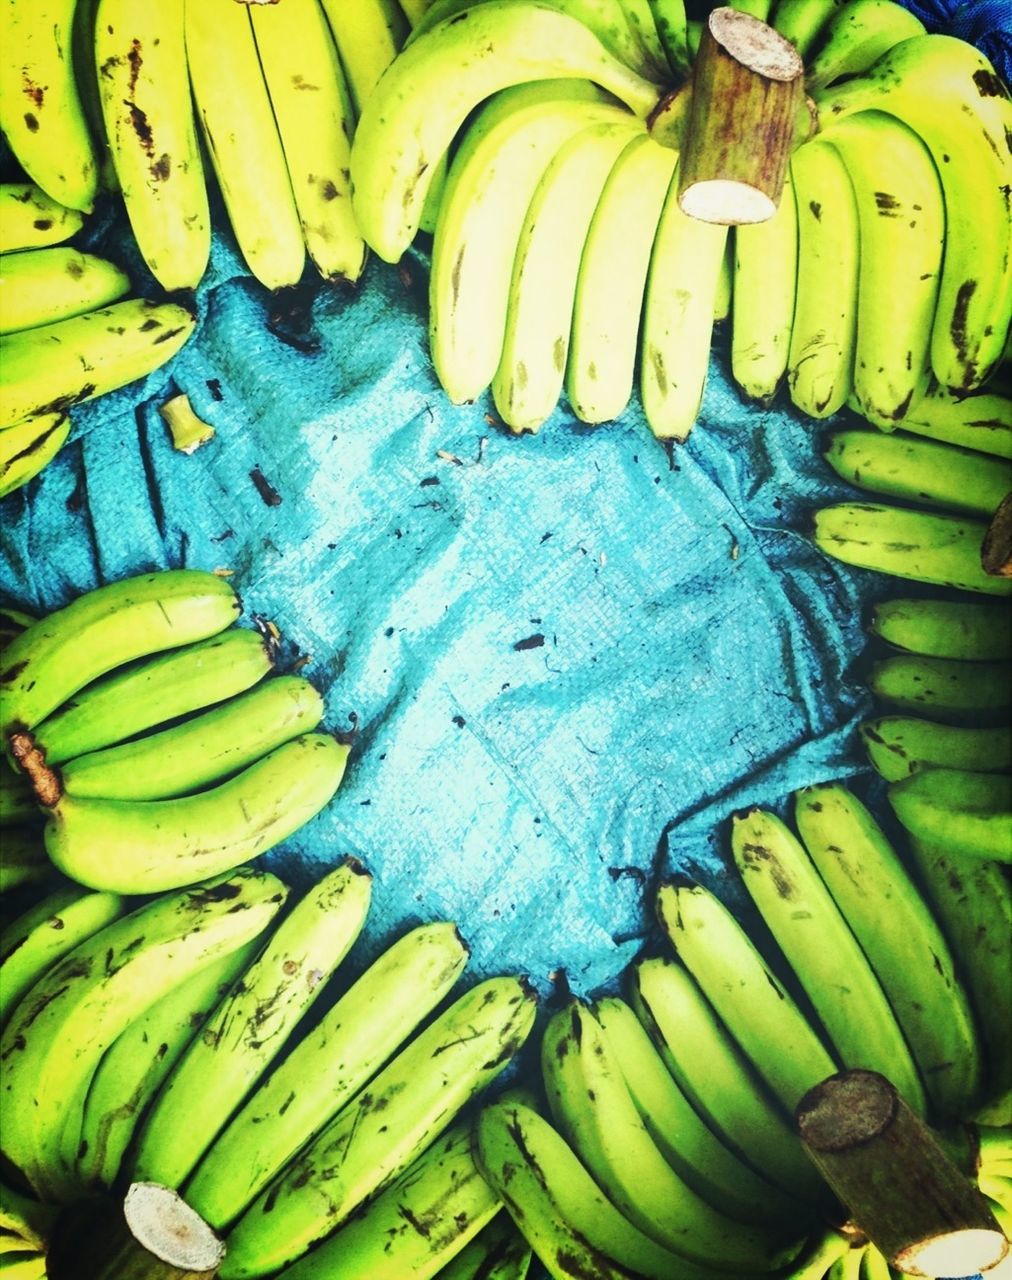 Green bananas for sale at the market